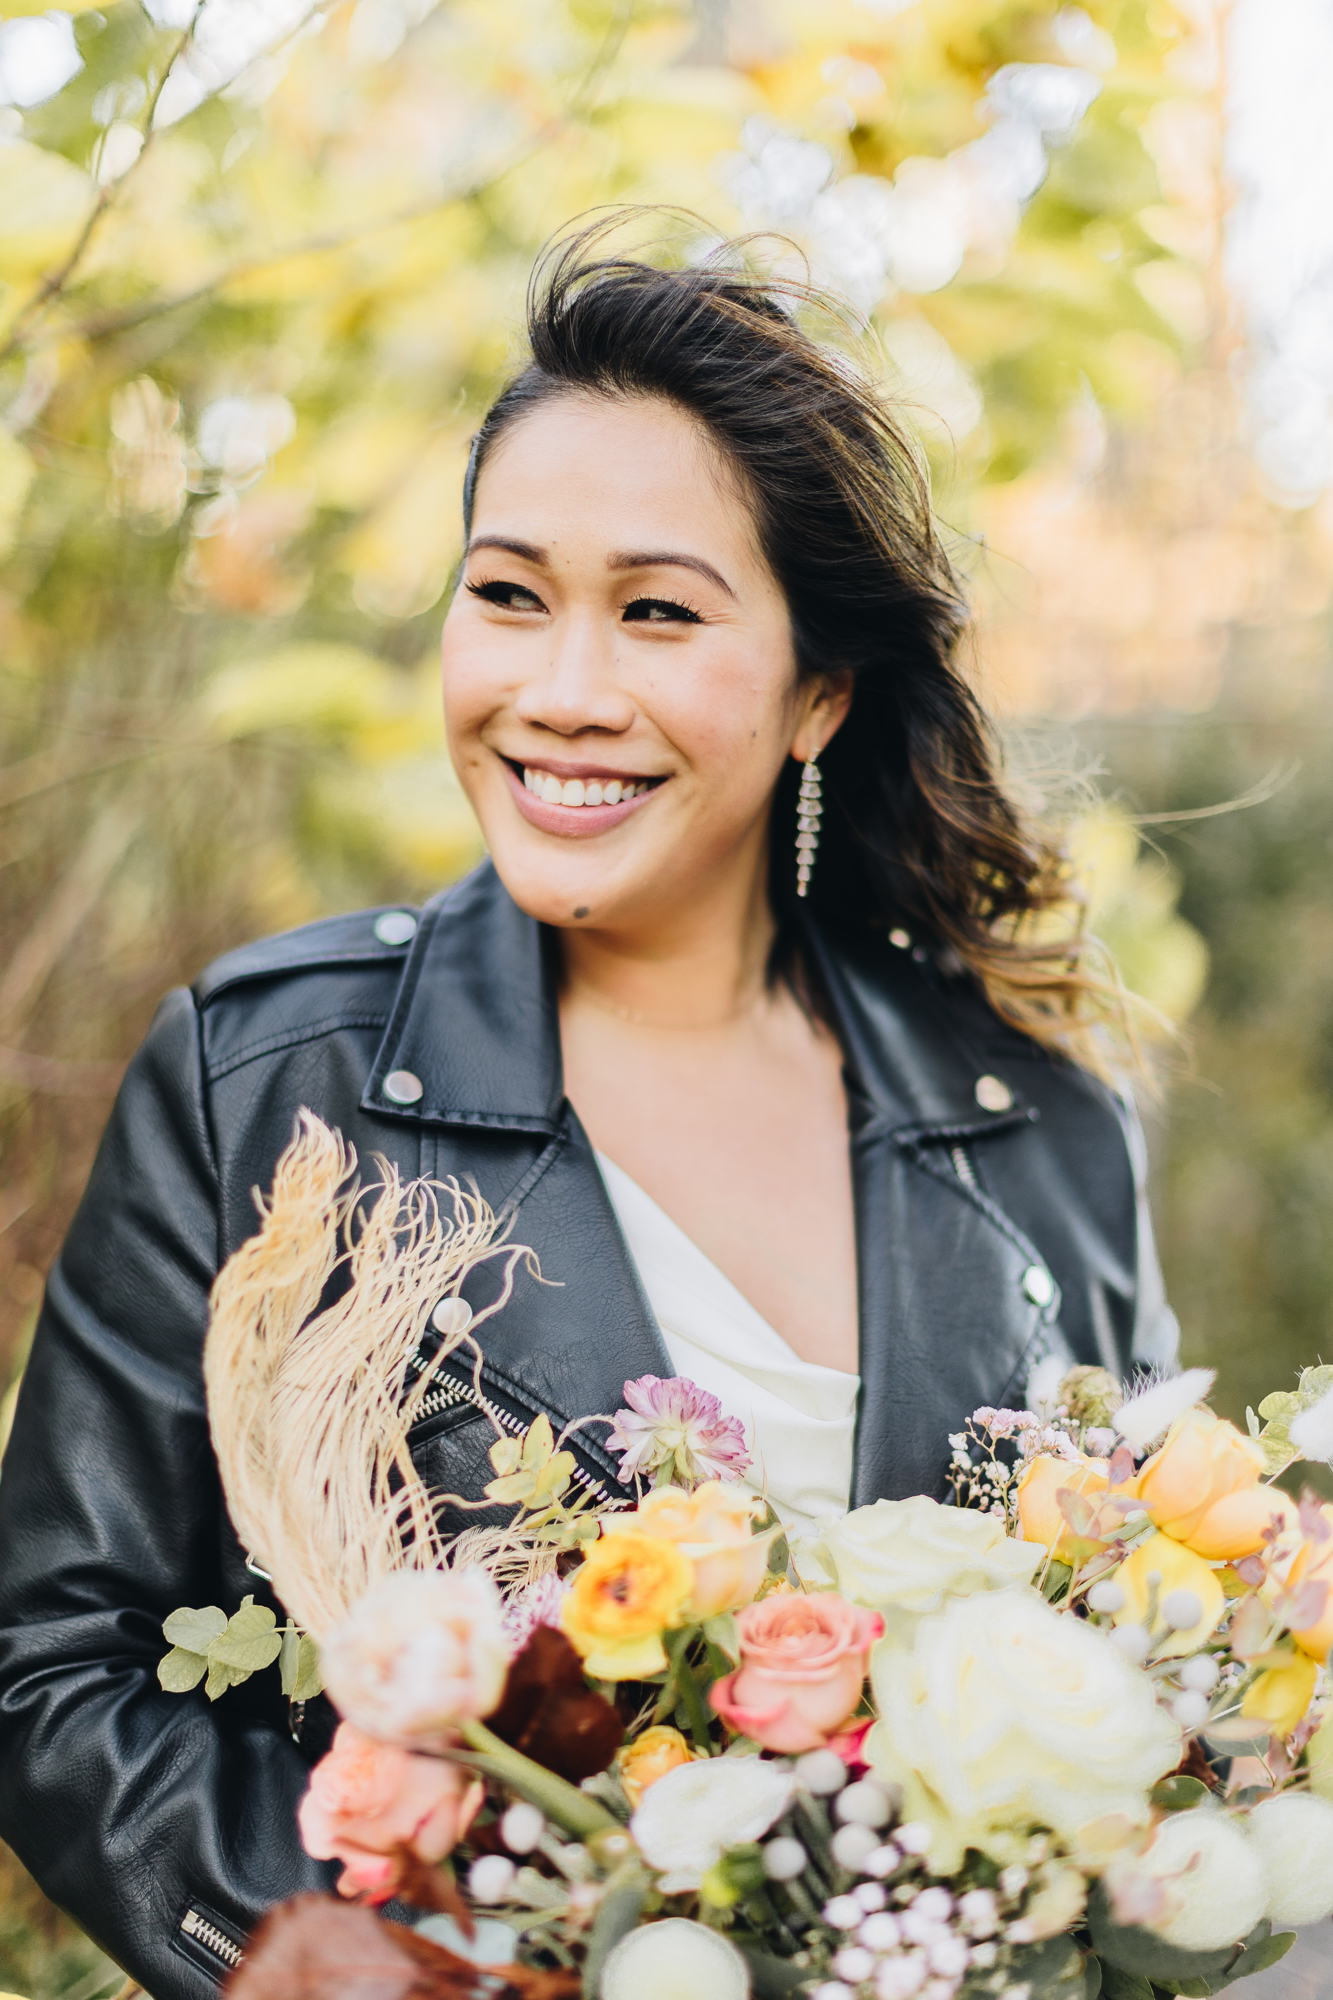 Stunning Fall DUMBO Elopement with NYC views and foliage